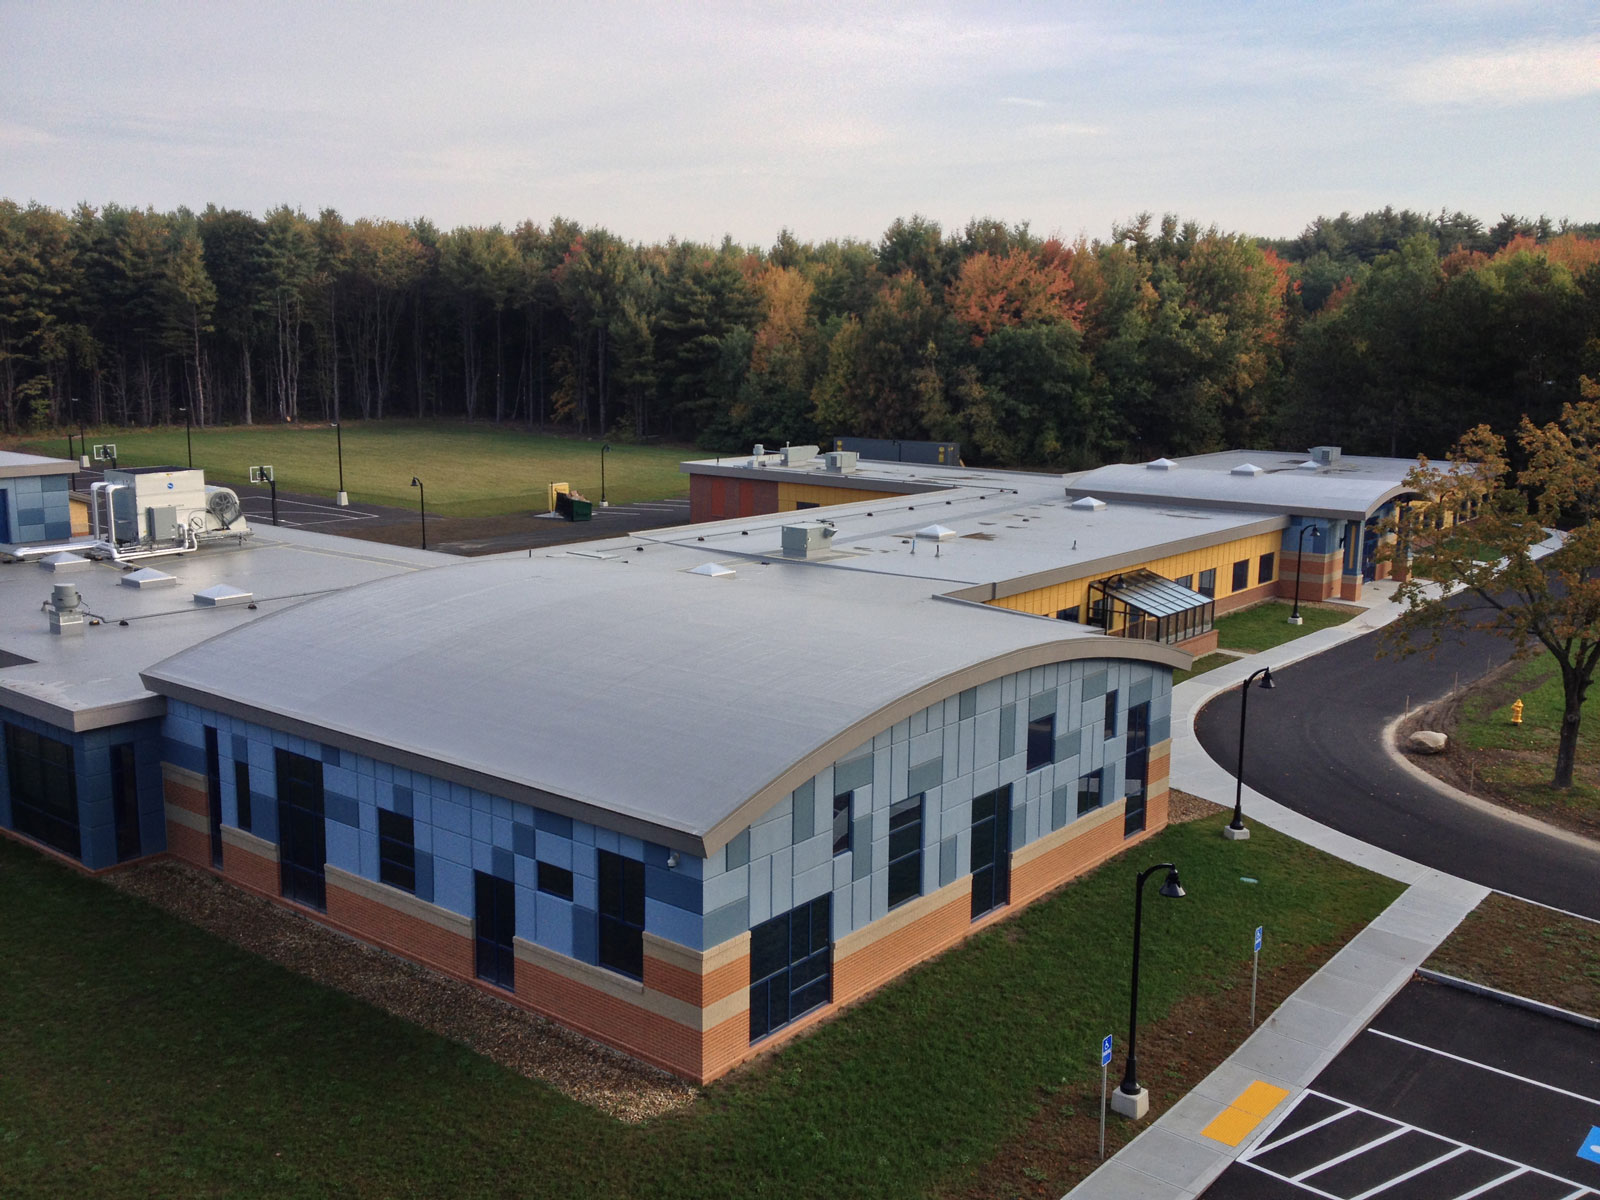 Boys and Girls Club Fitchburg-Leominster roofing project - 1